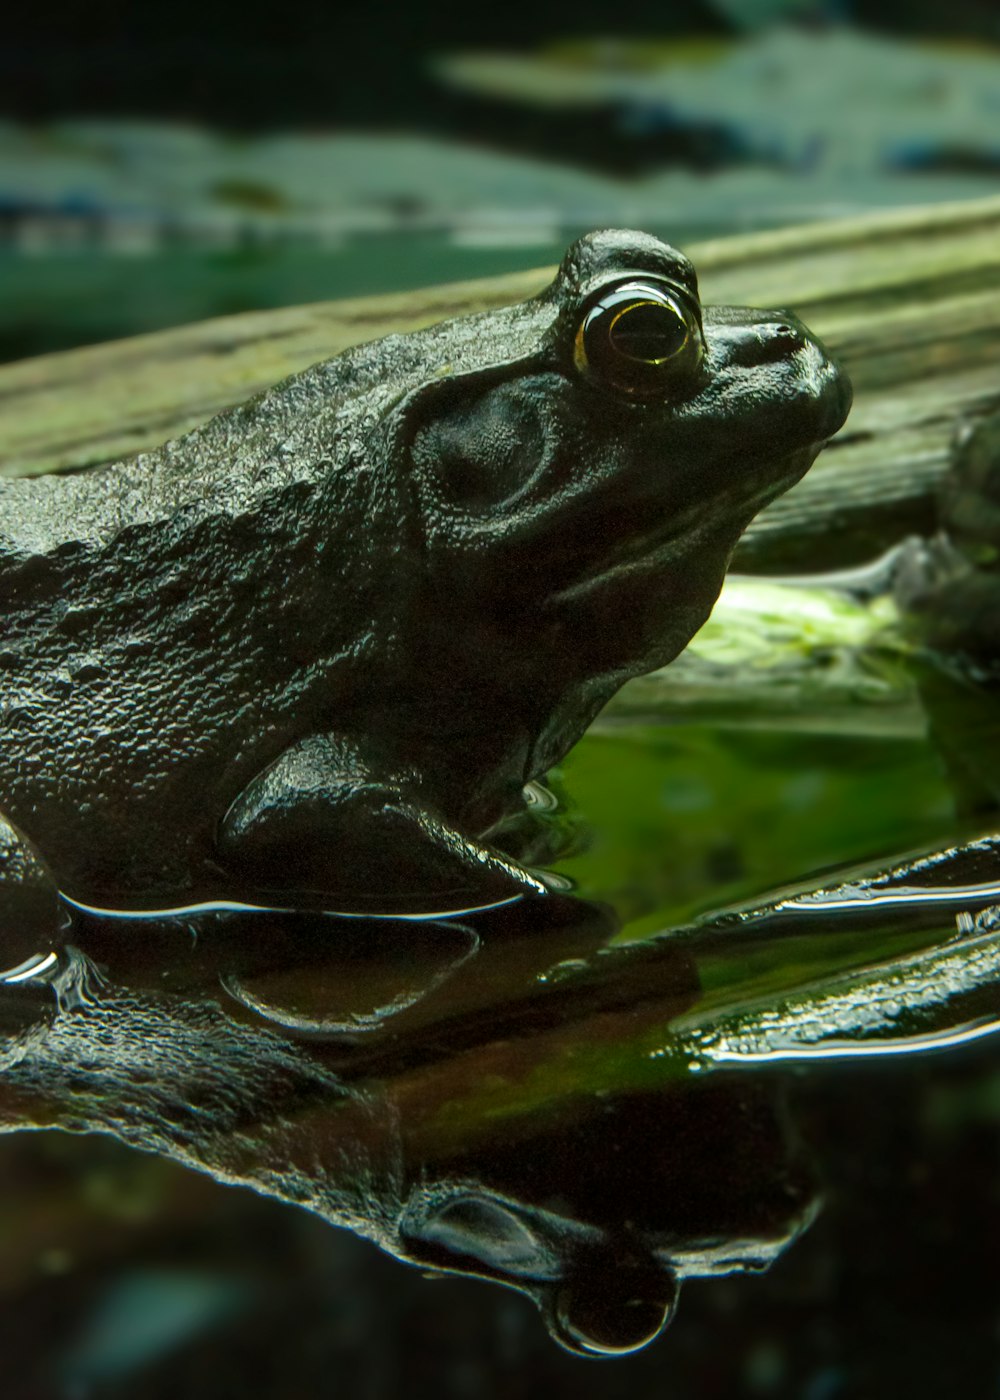 a close up of a frog in water